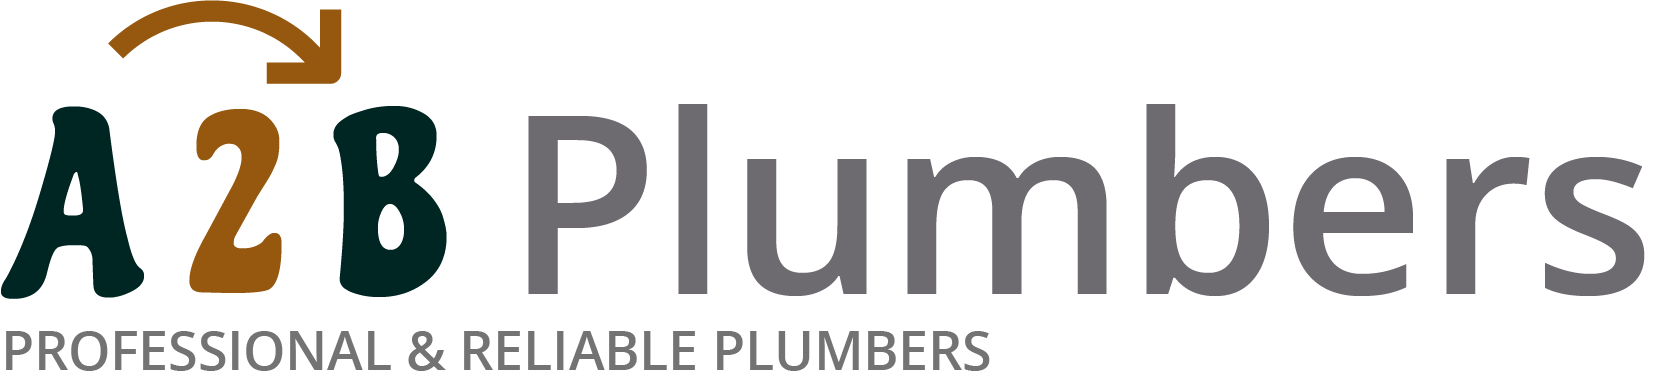 If you need a boiler installed, a radiator repaired or a leaking tap fixed, call us now - we provide services for properties in Guisborough and the local area.